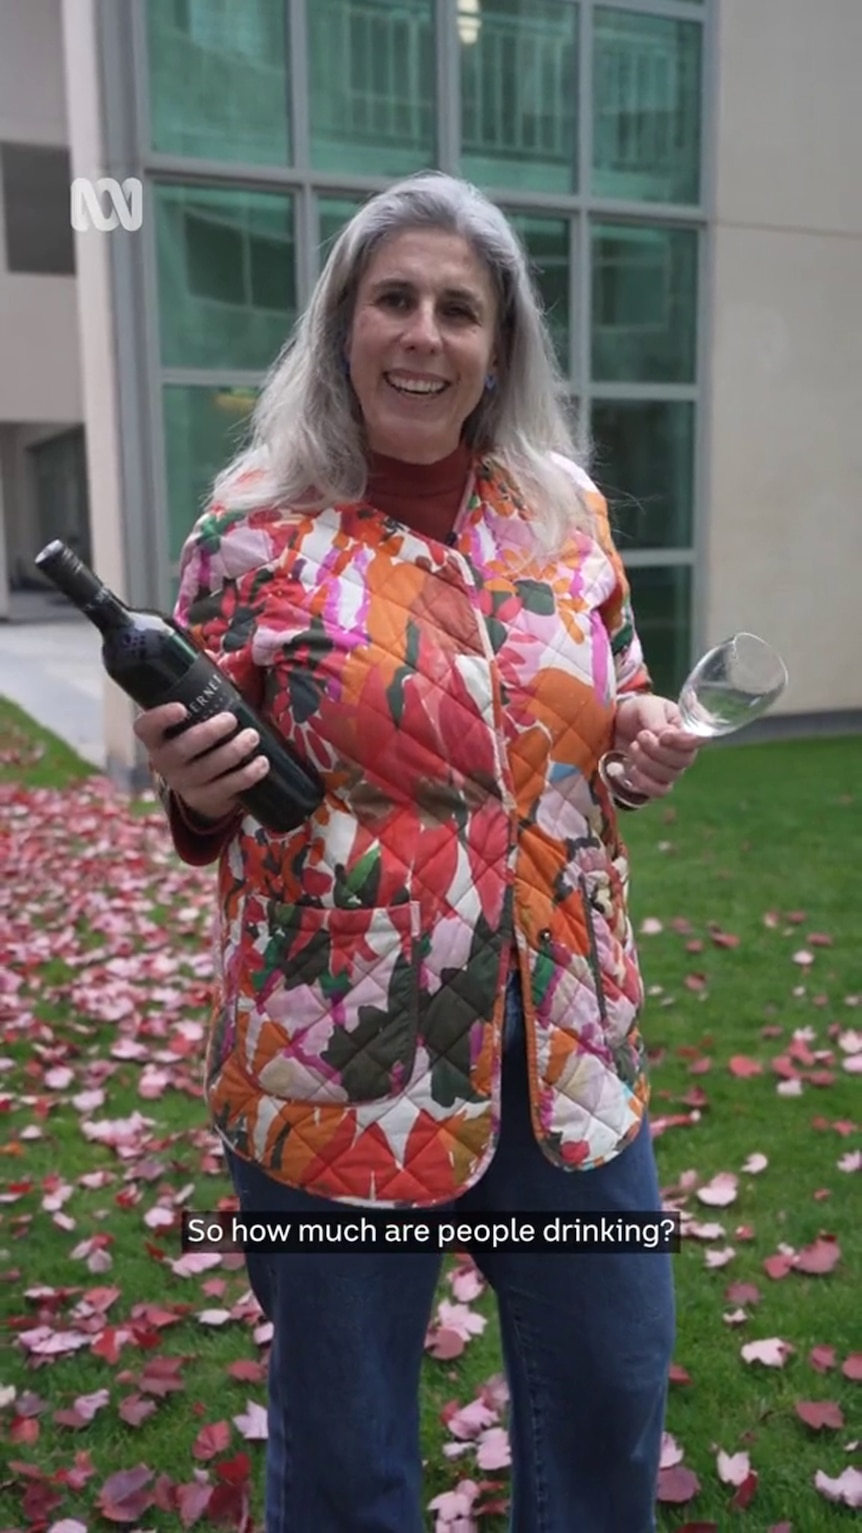 A middle-aged woman holds a wine bottle in one hand and a wine glass in the other